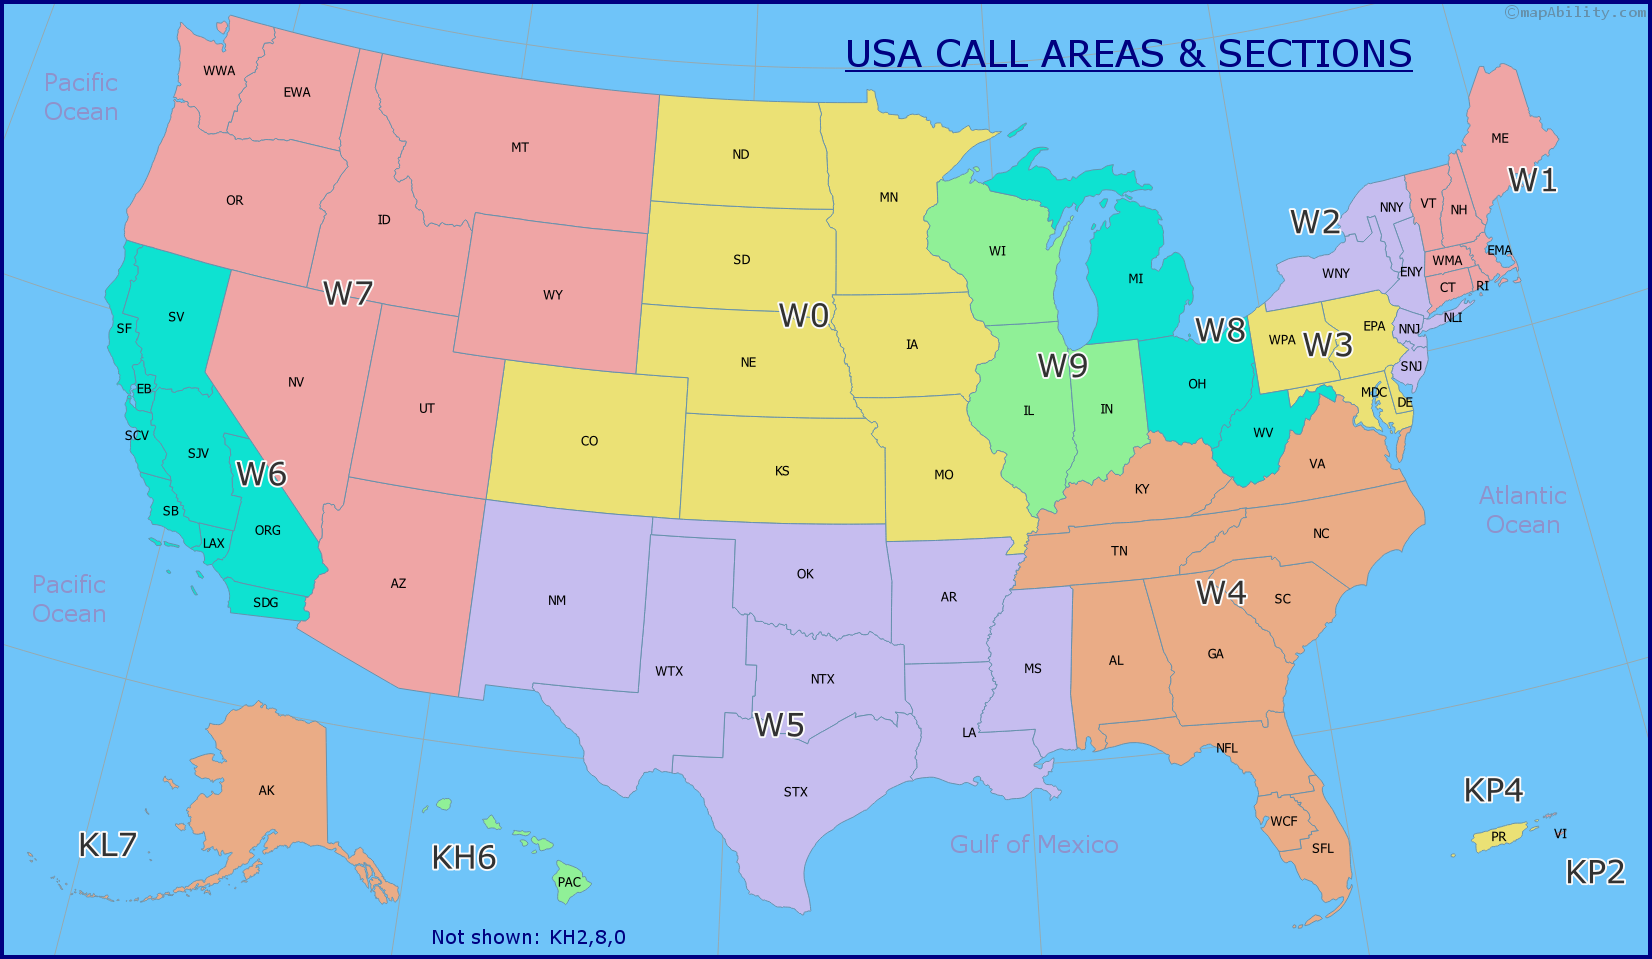 USA callsign areas from https://www.mapability.com/ei8ic/maps/usa_call_areas.php